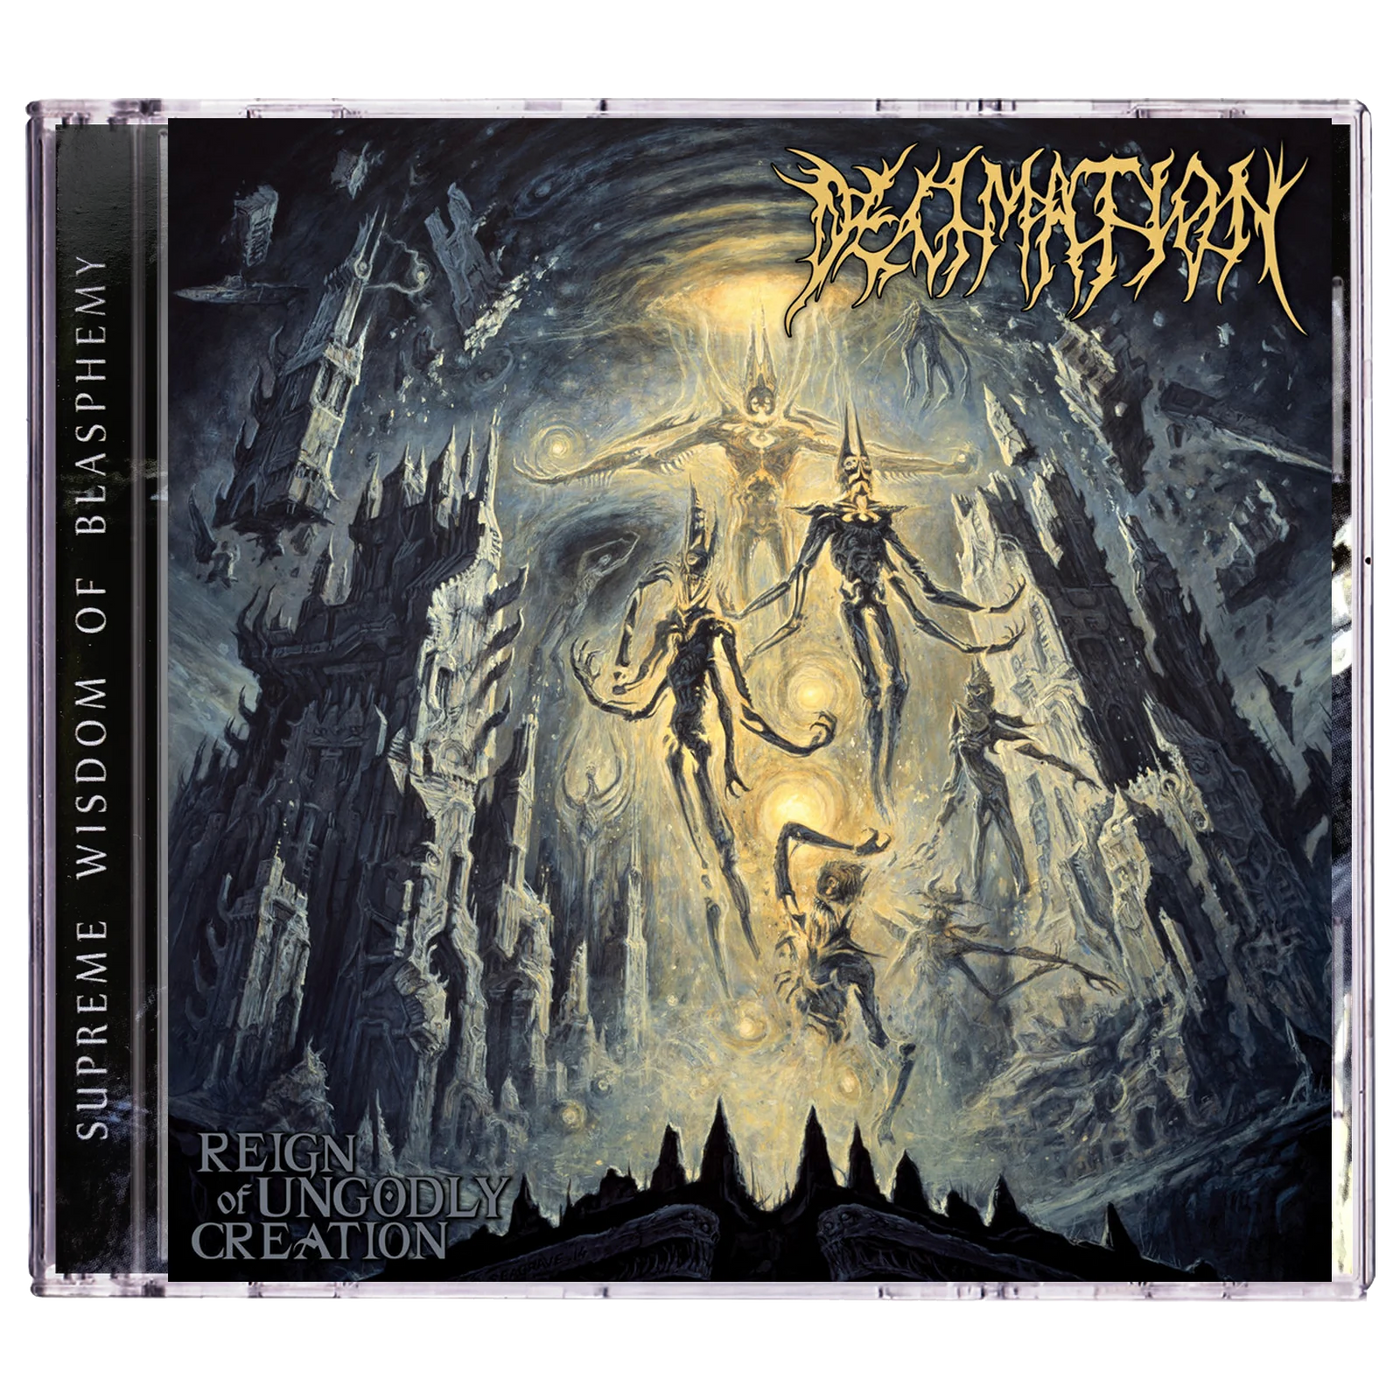 Decimation 'Reign of Ungodly Creation' CD